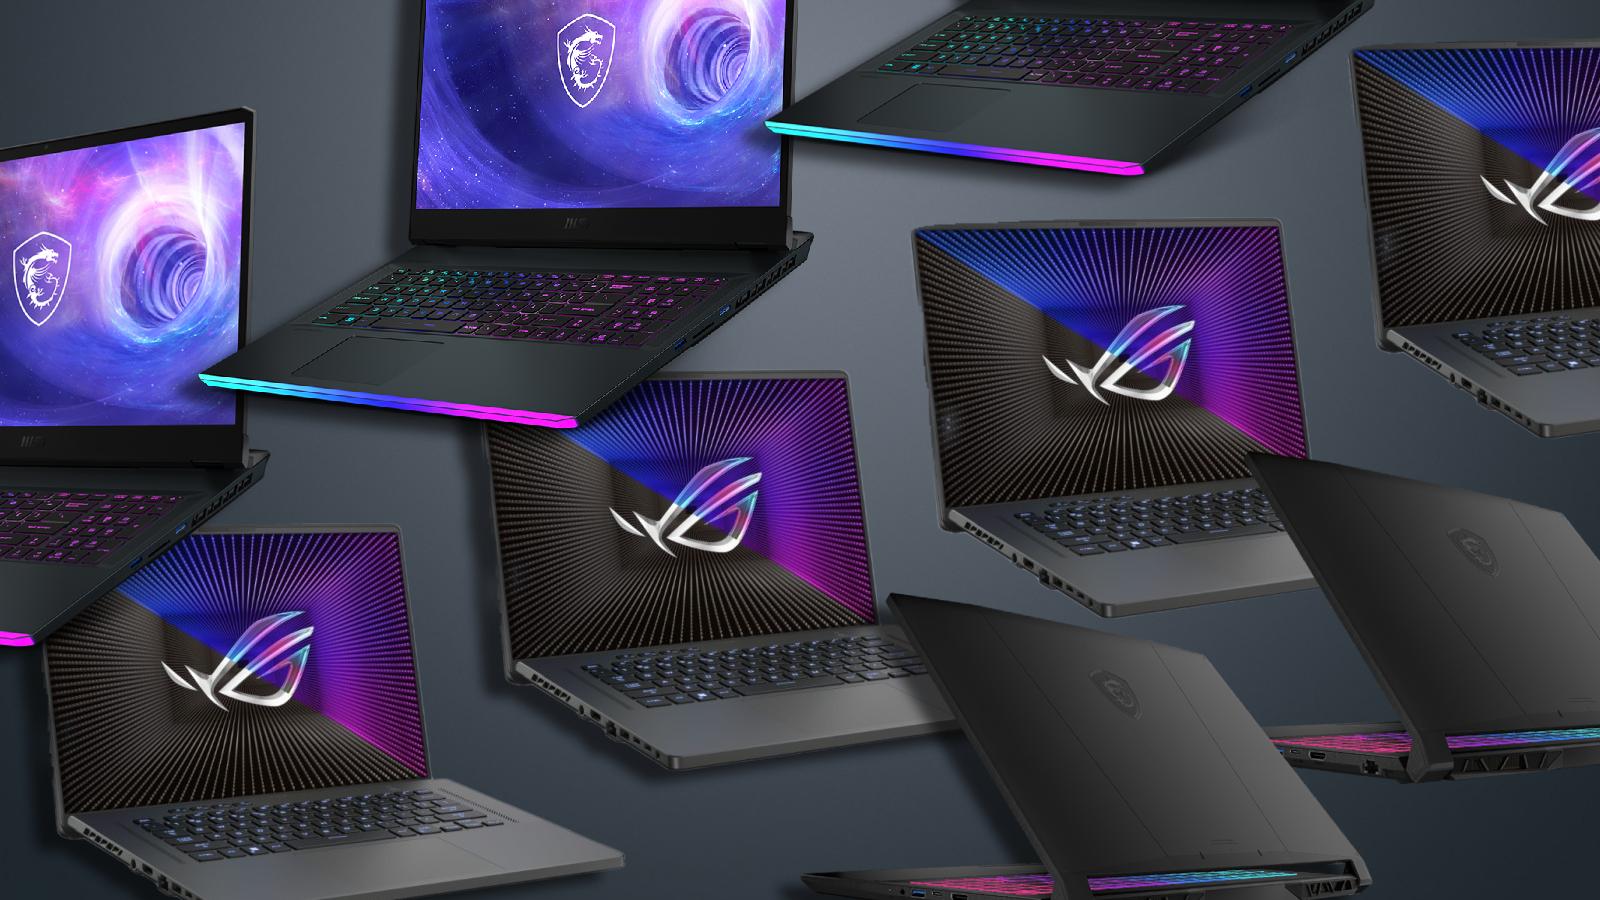 An image showing some of the best gaming laptops